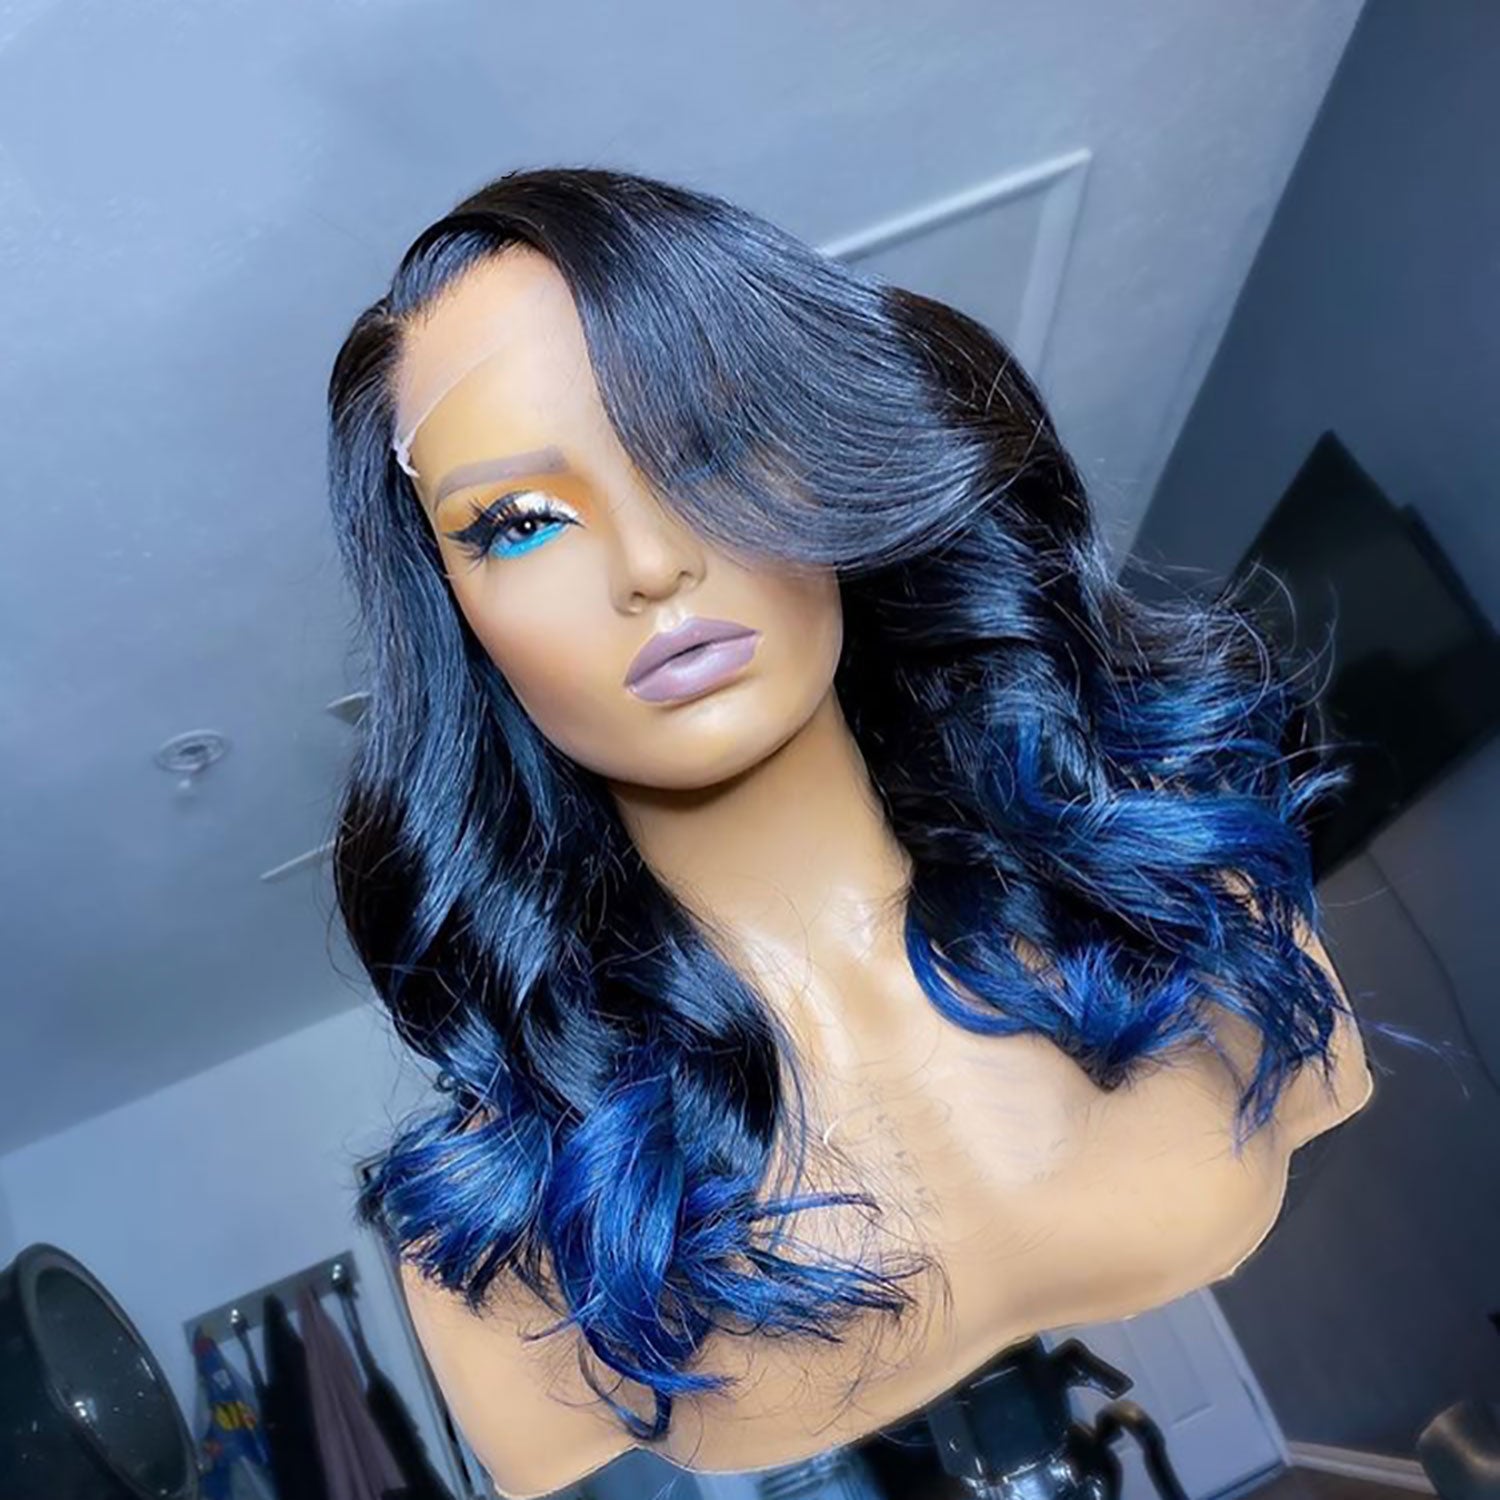 Midnight Blue Lace Front Wig with Dark Roots 100% Human Hair Wig